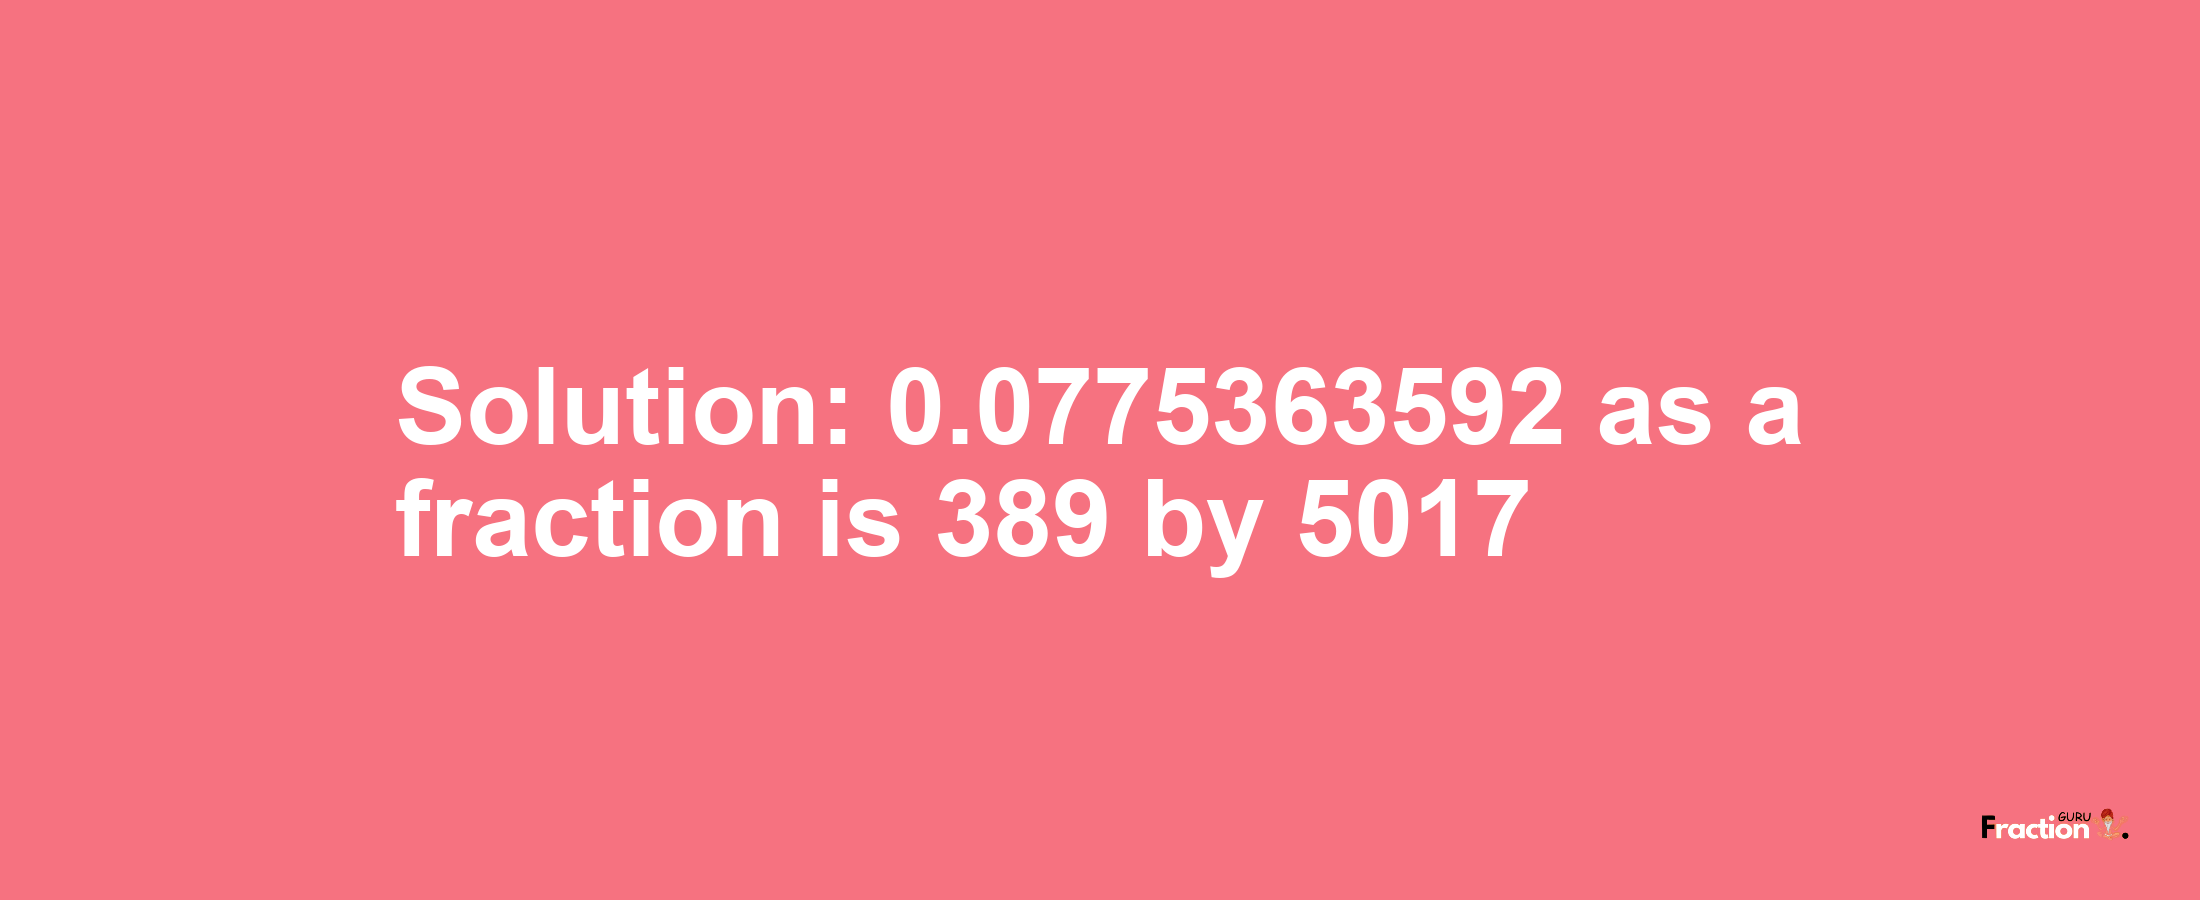 Solution:0.0775363592 as a fraction is 389/5017